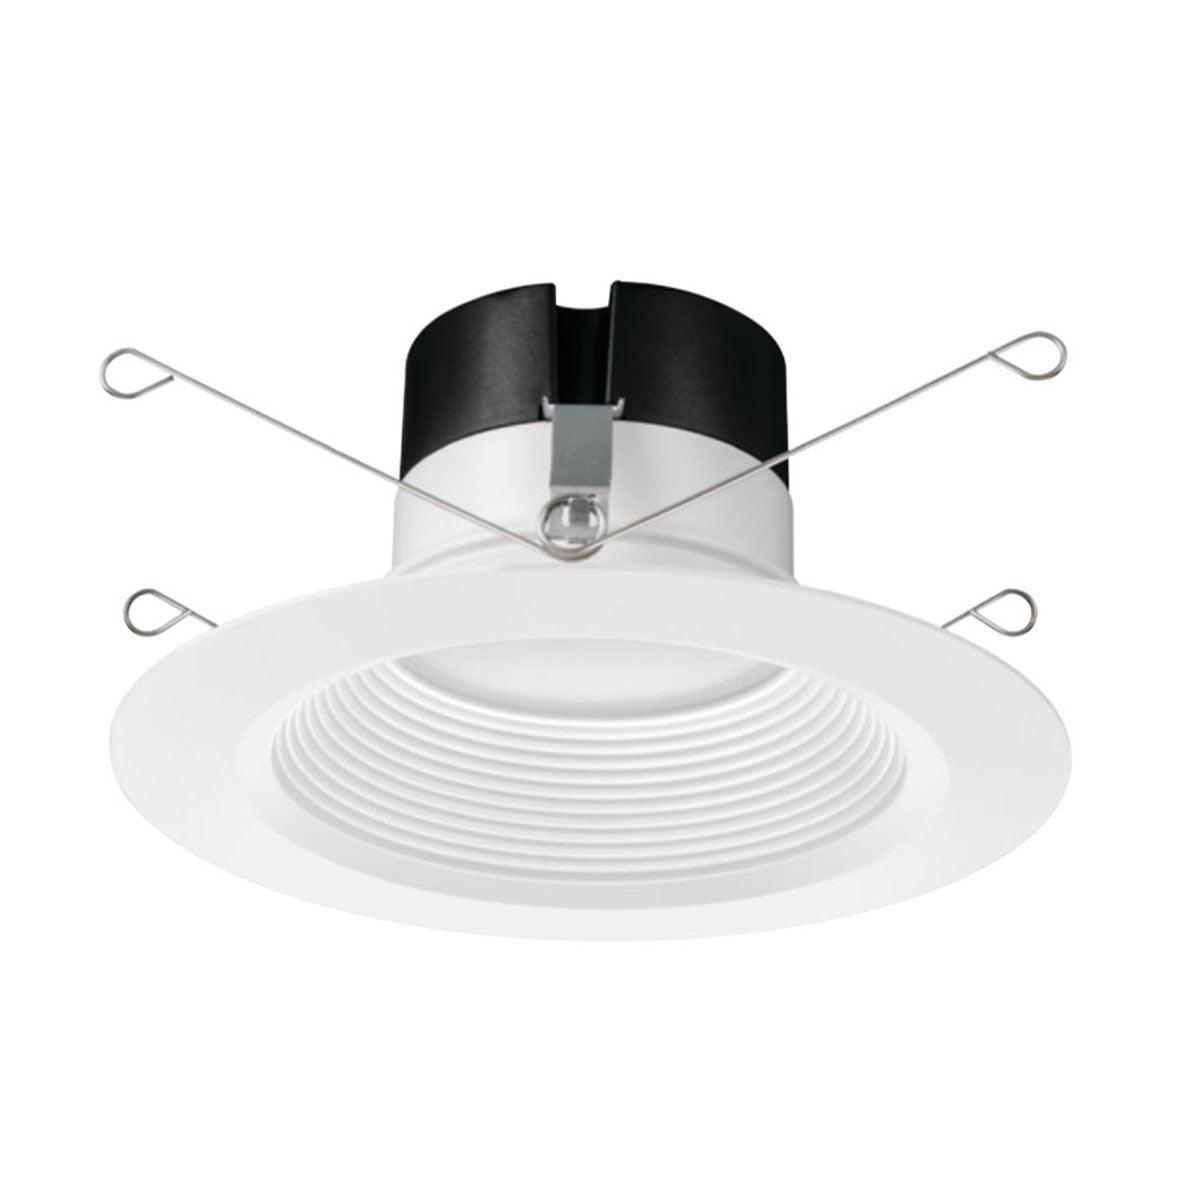 6 Inch Recessed LED Can Light, Round, 10 Watt, 900 Lumens, Selectable CCT, 2700K to 5000K, Baffle Trim